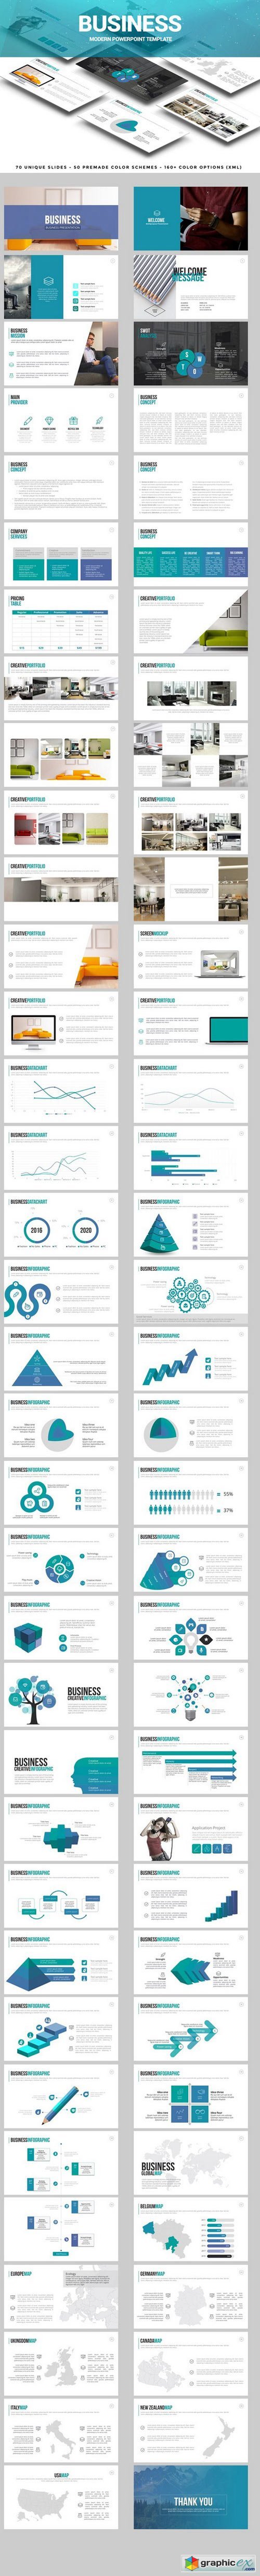 Business Powerpoint 729460